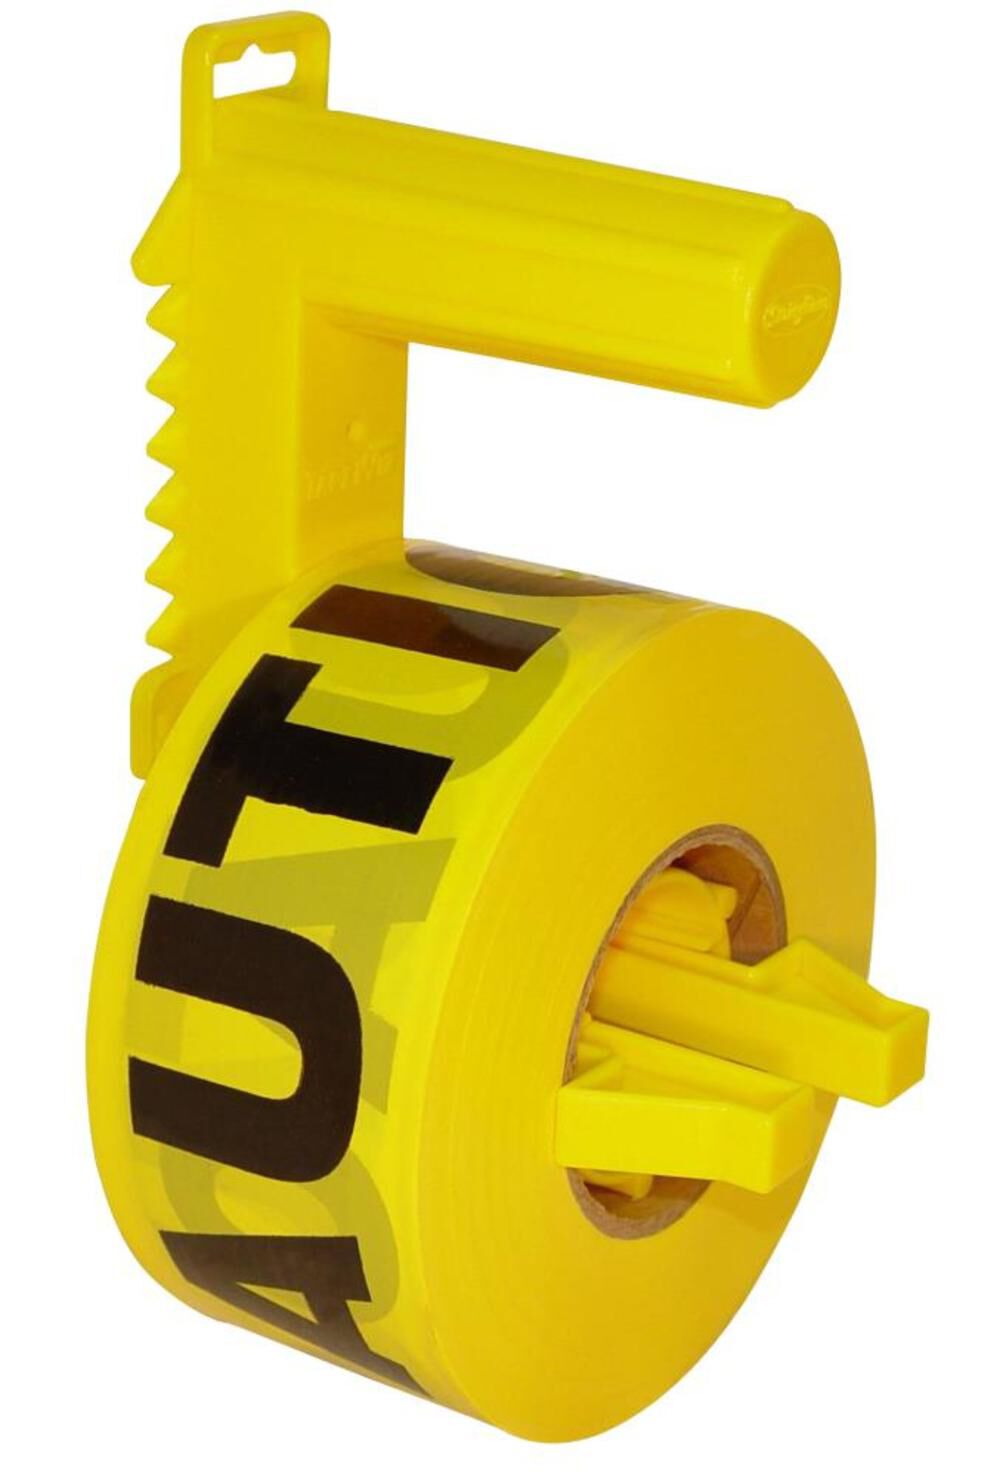 Tape Pro Barricade Tape Dispenser with Yellow Caution Tape 42020